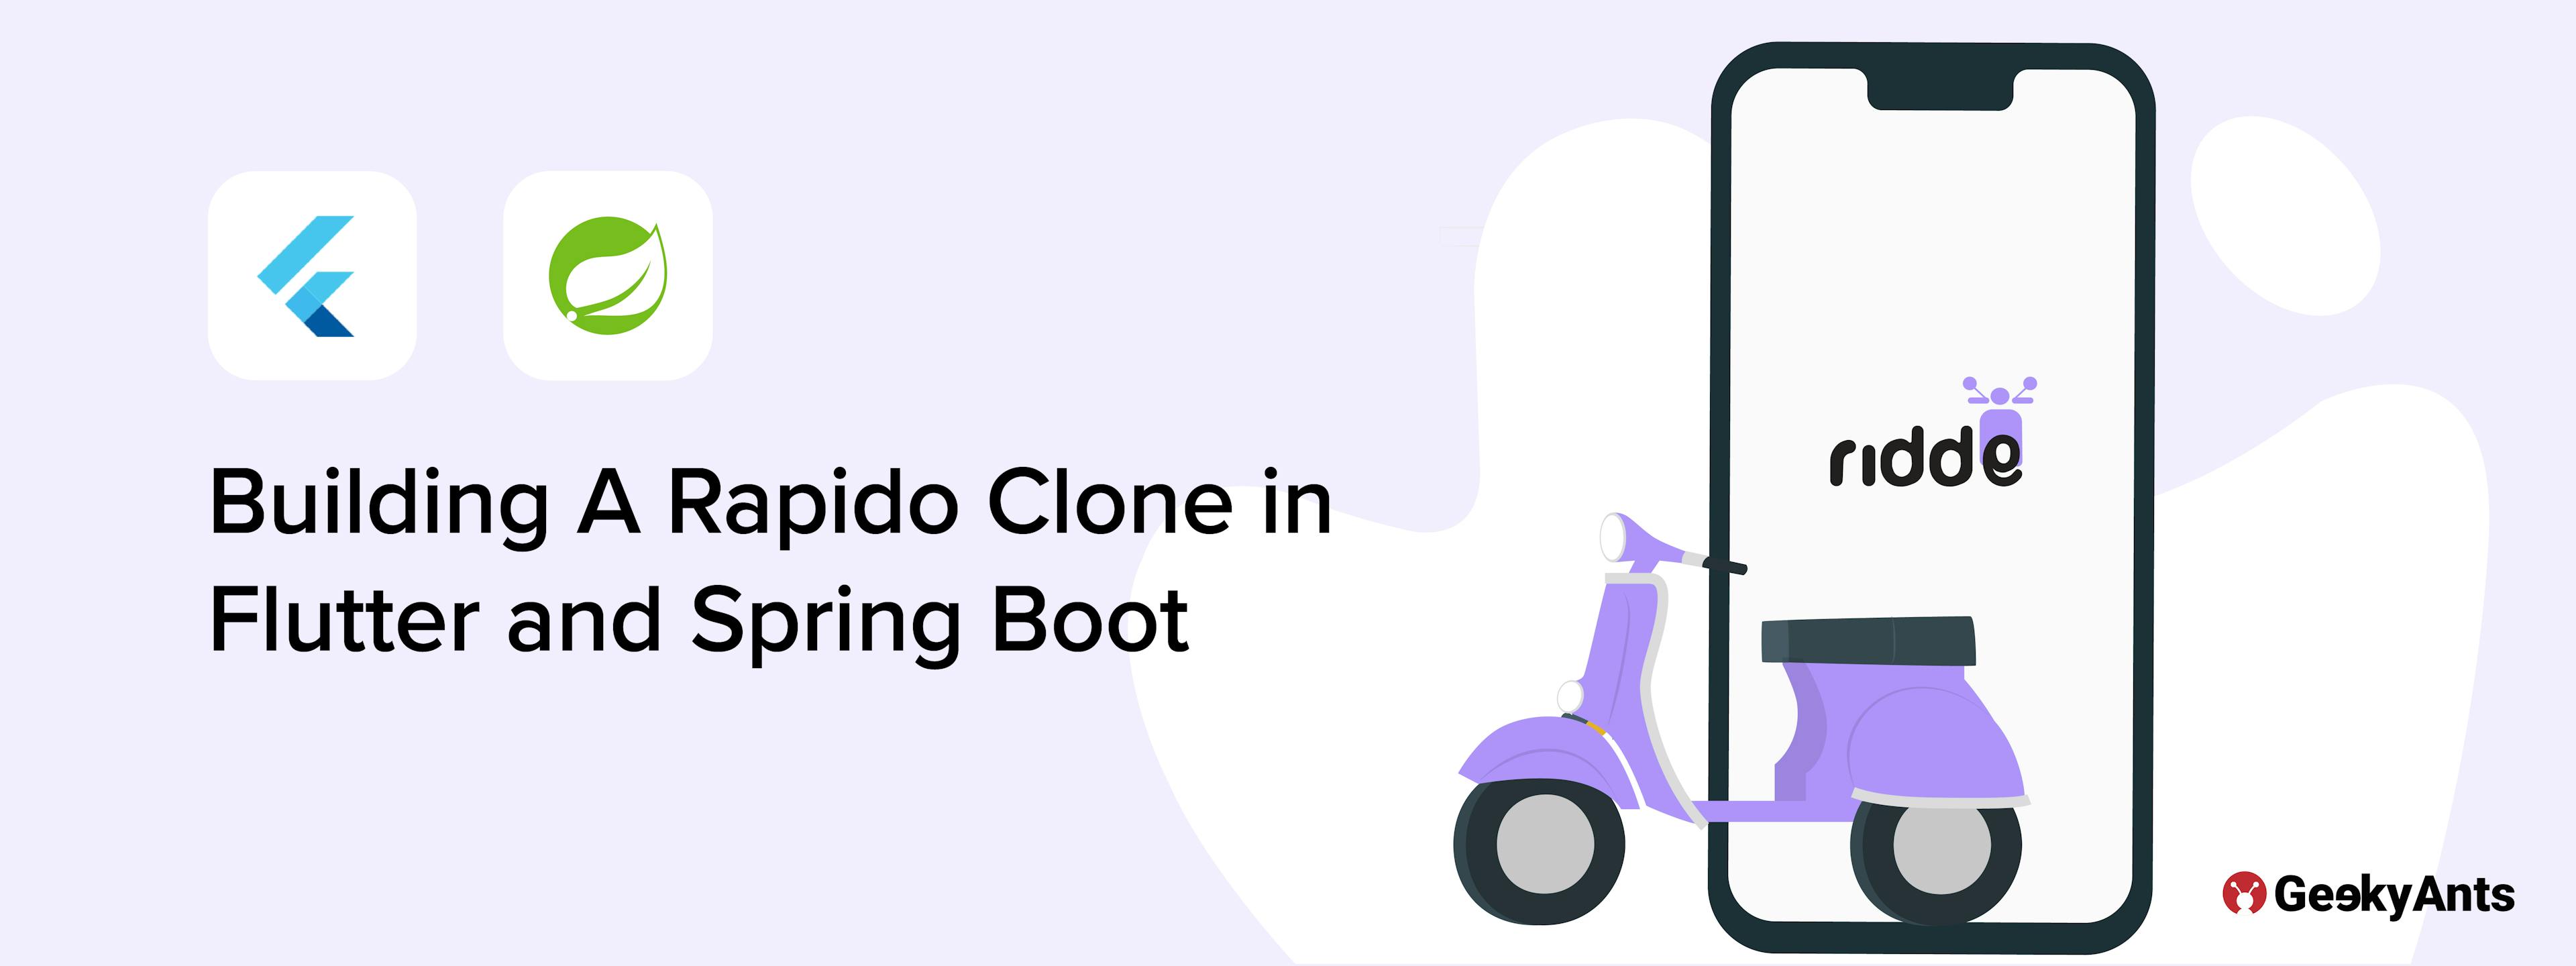 Building A Rapido Clone in Flutter and Spring Boot